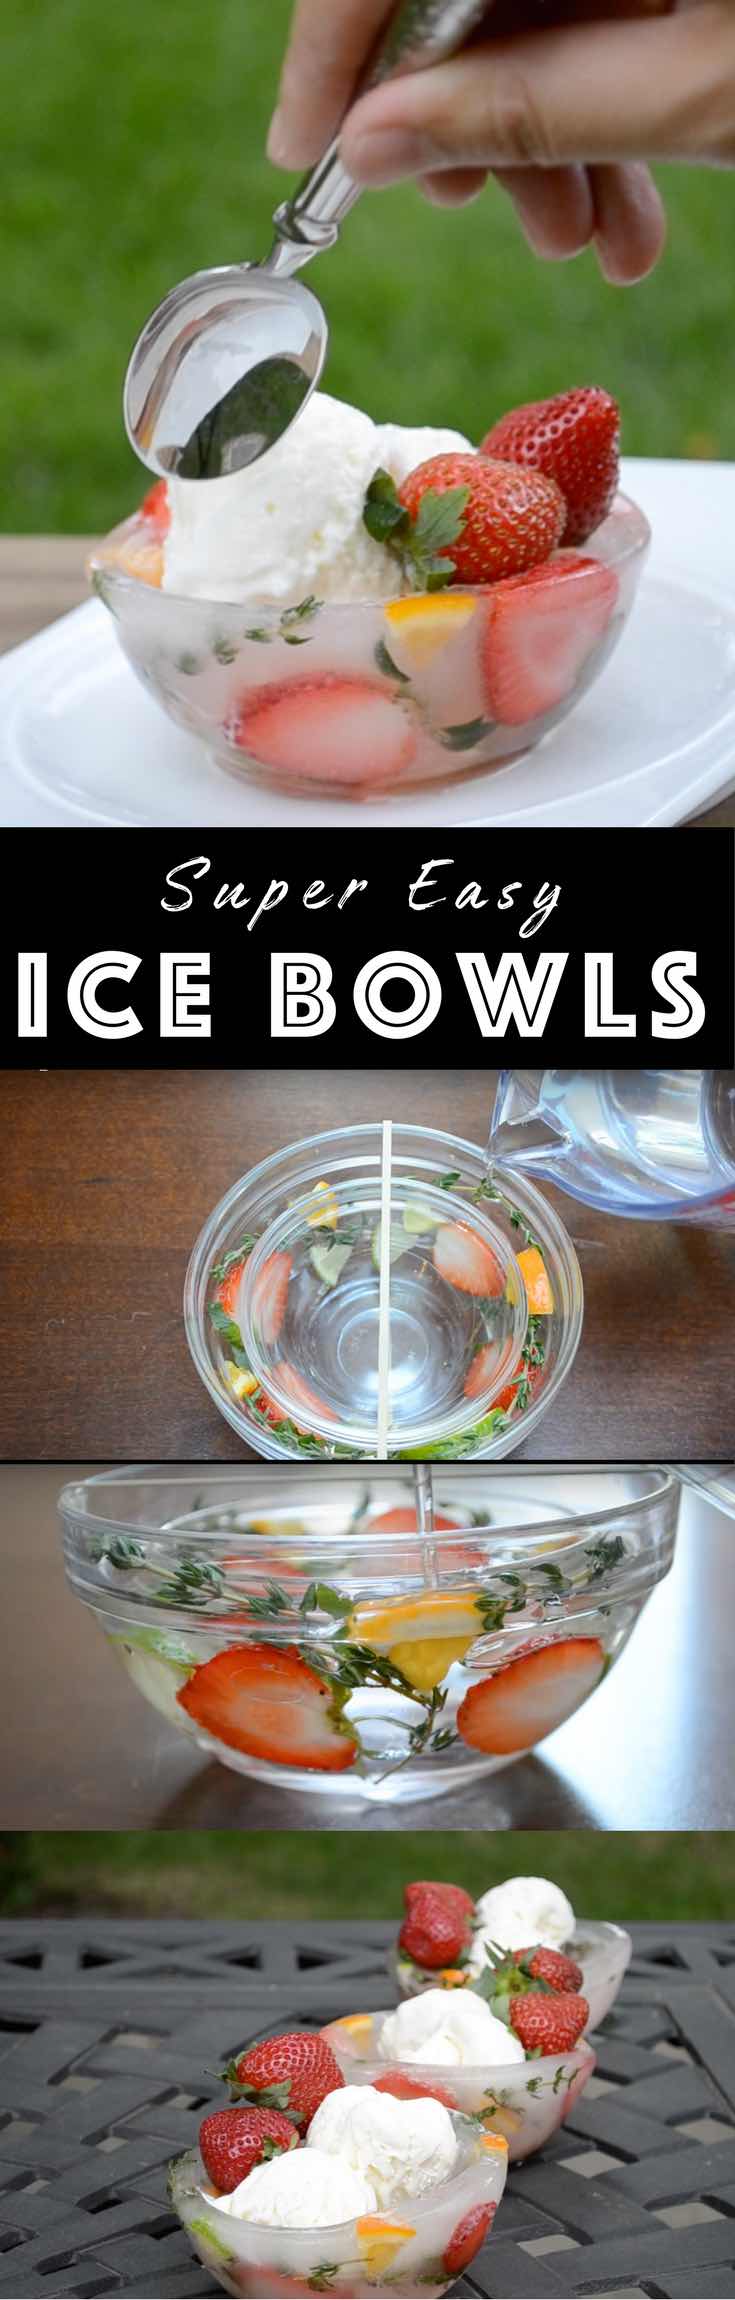 How to Make an Ice Bowl to keep ice cream and desserts chilled while serving. It‘s s